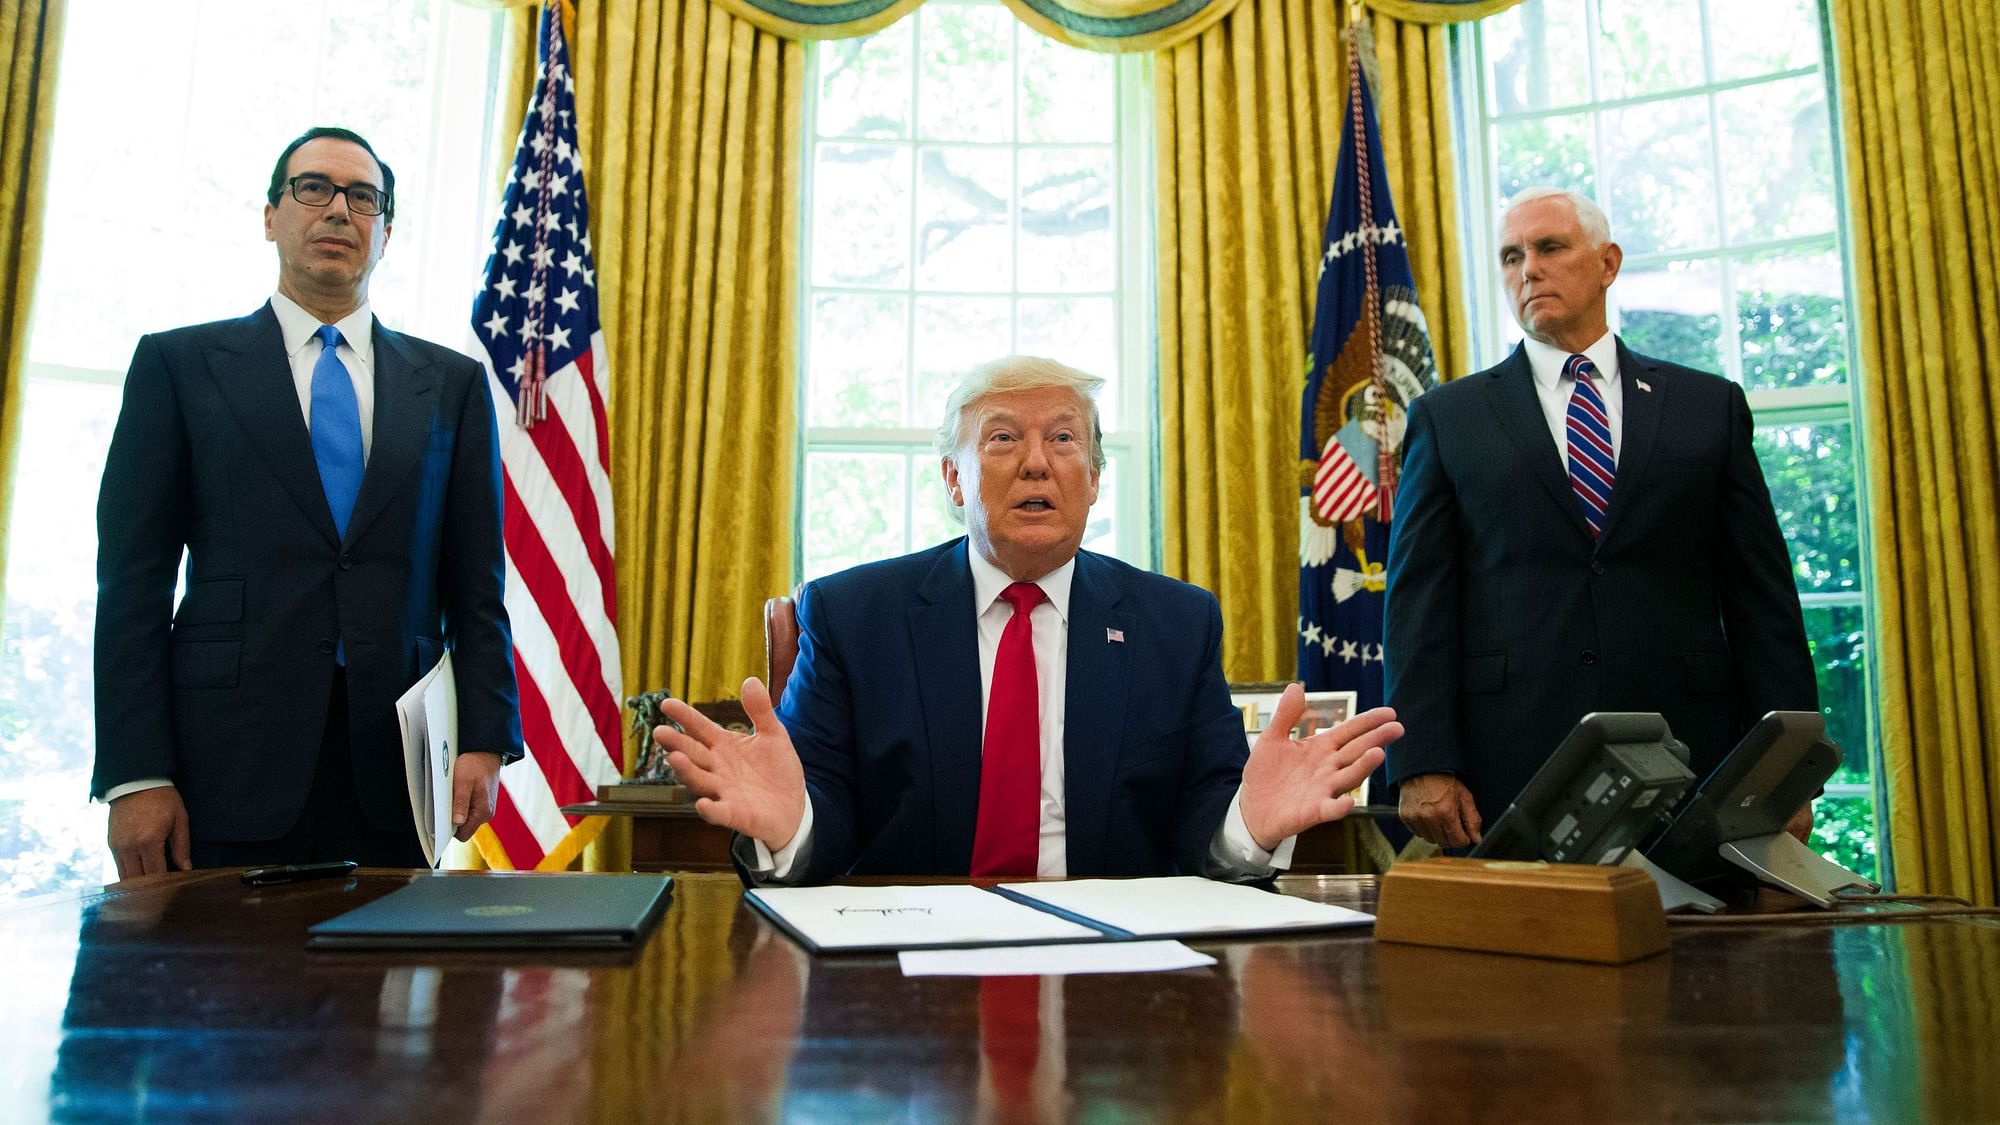 President Donald Trump,&nbsp; after signing an executive order to increase sanctions on Iran, in the Oval Office of the White House.